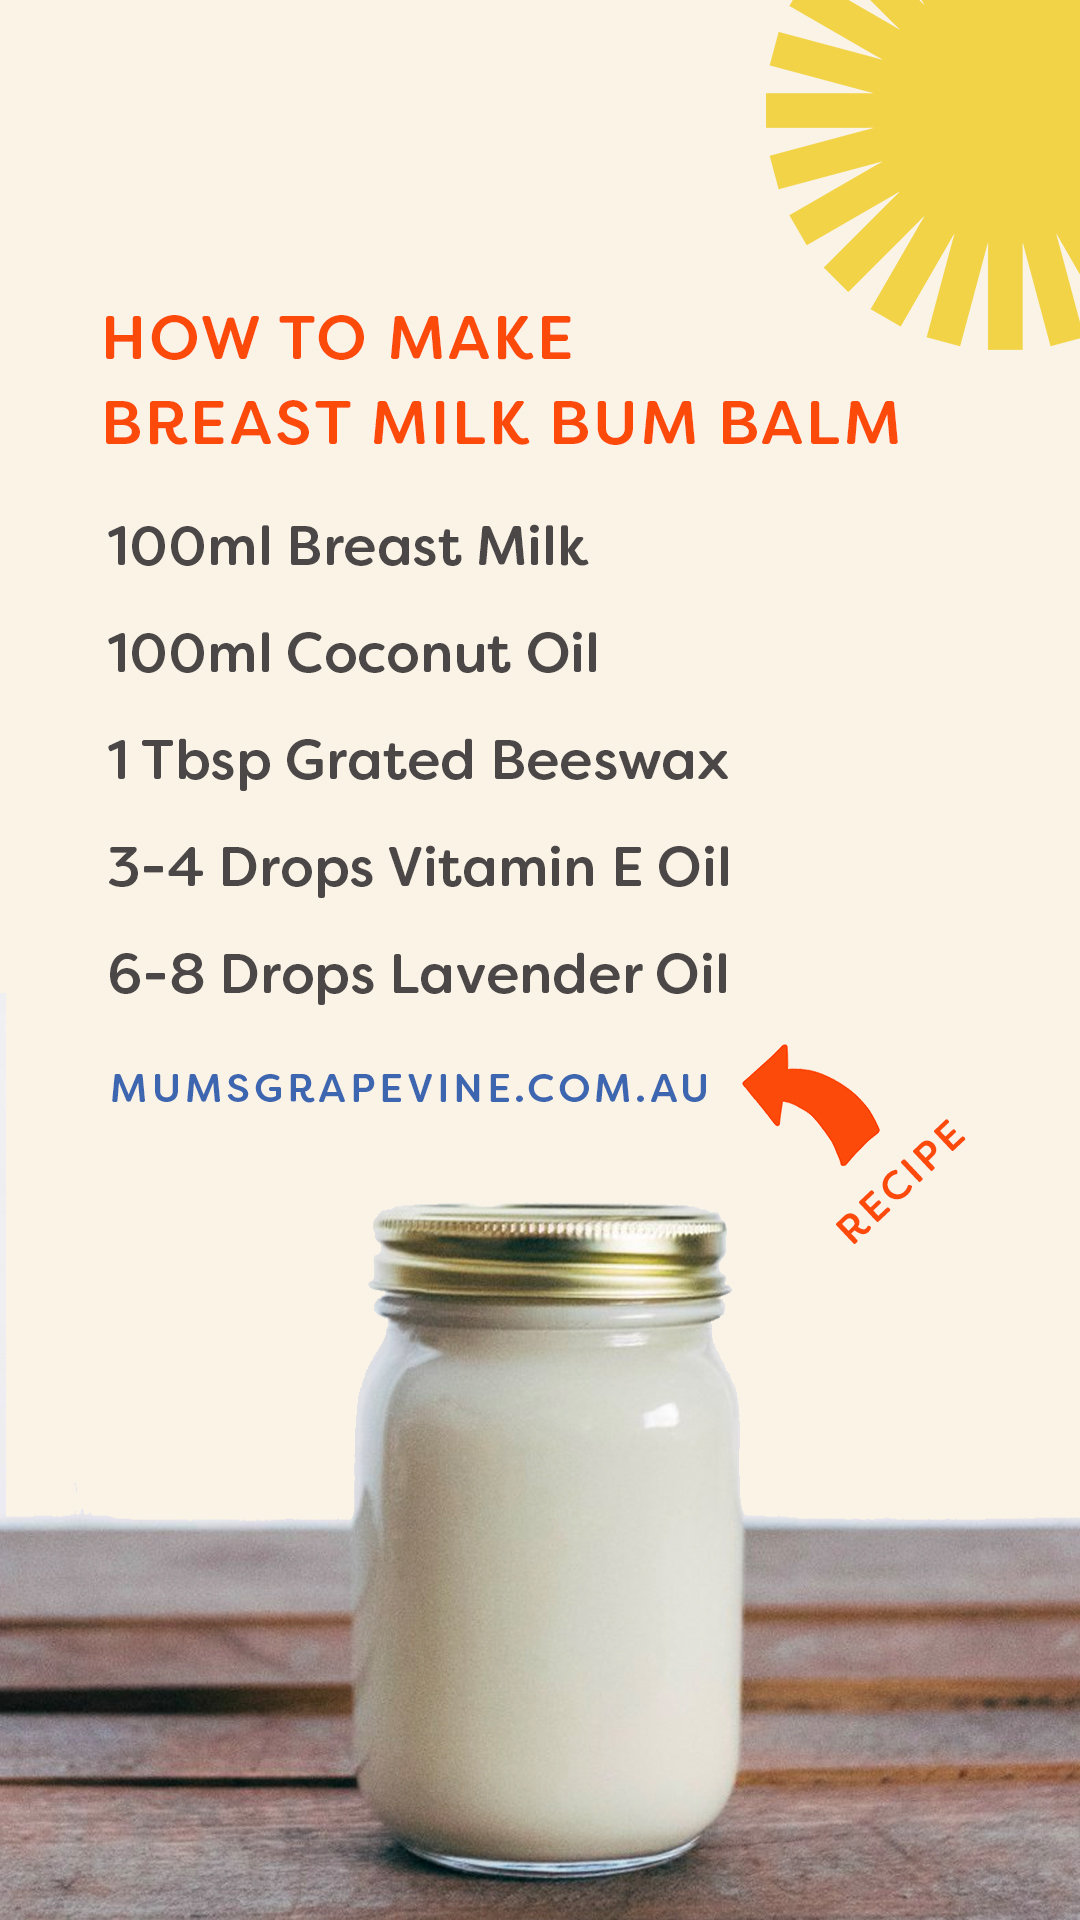 Ingredients listed to make homemade breast milk nappy balm